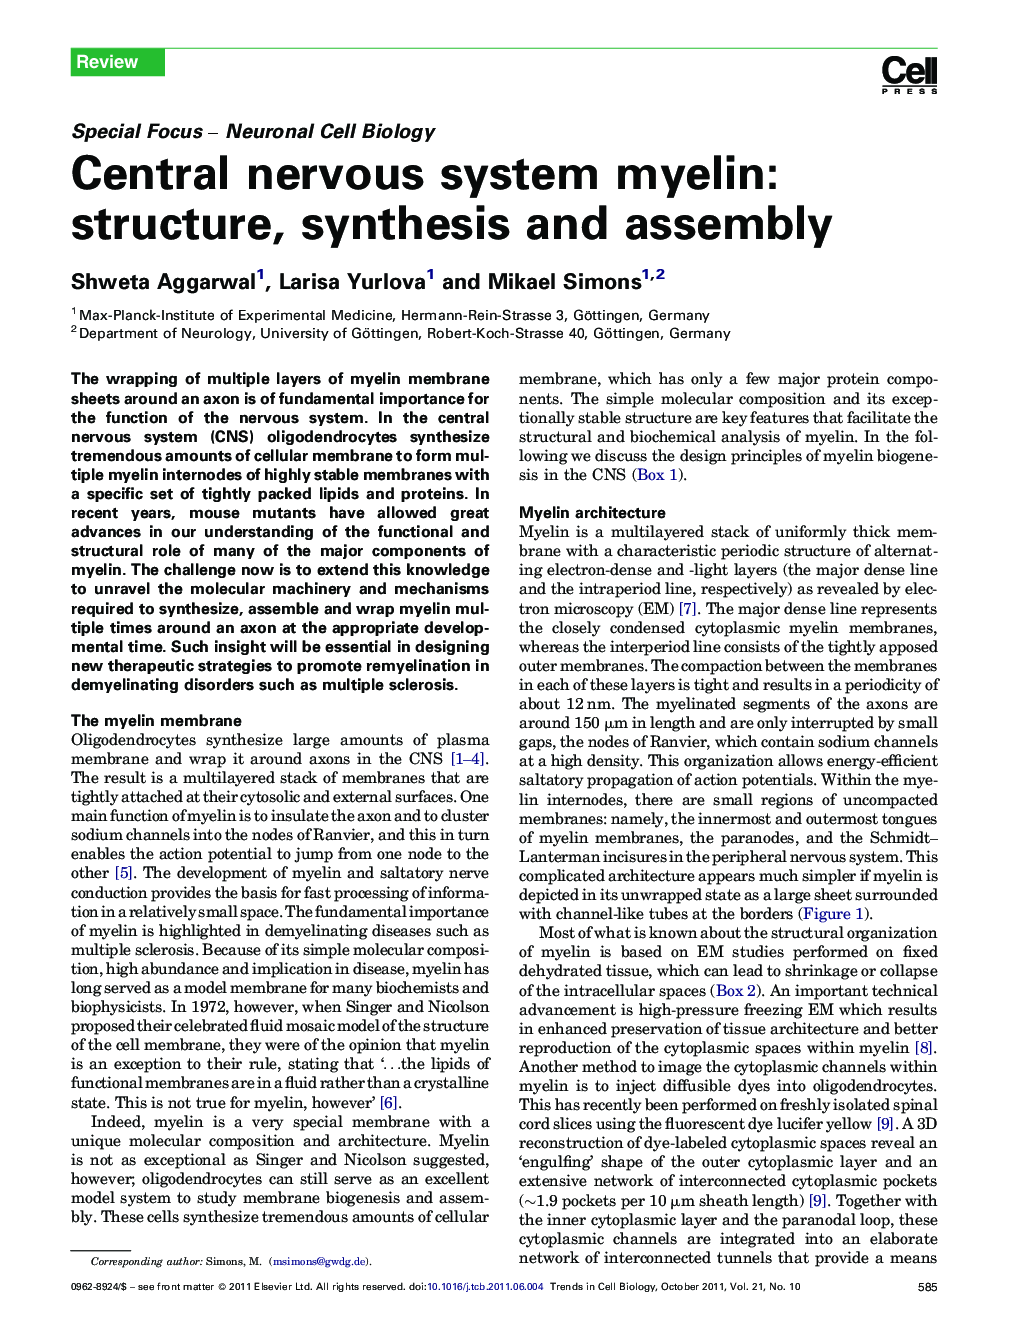 Central nervous system myelin: structure, synthesis and assembly